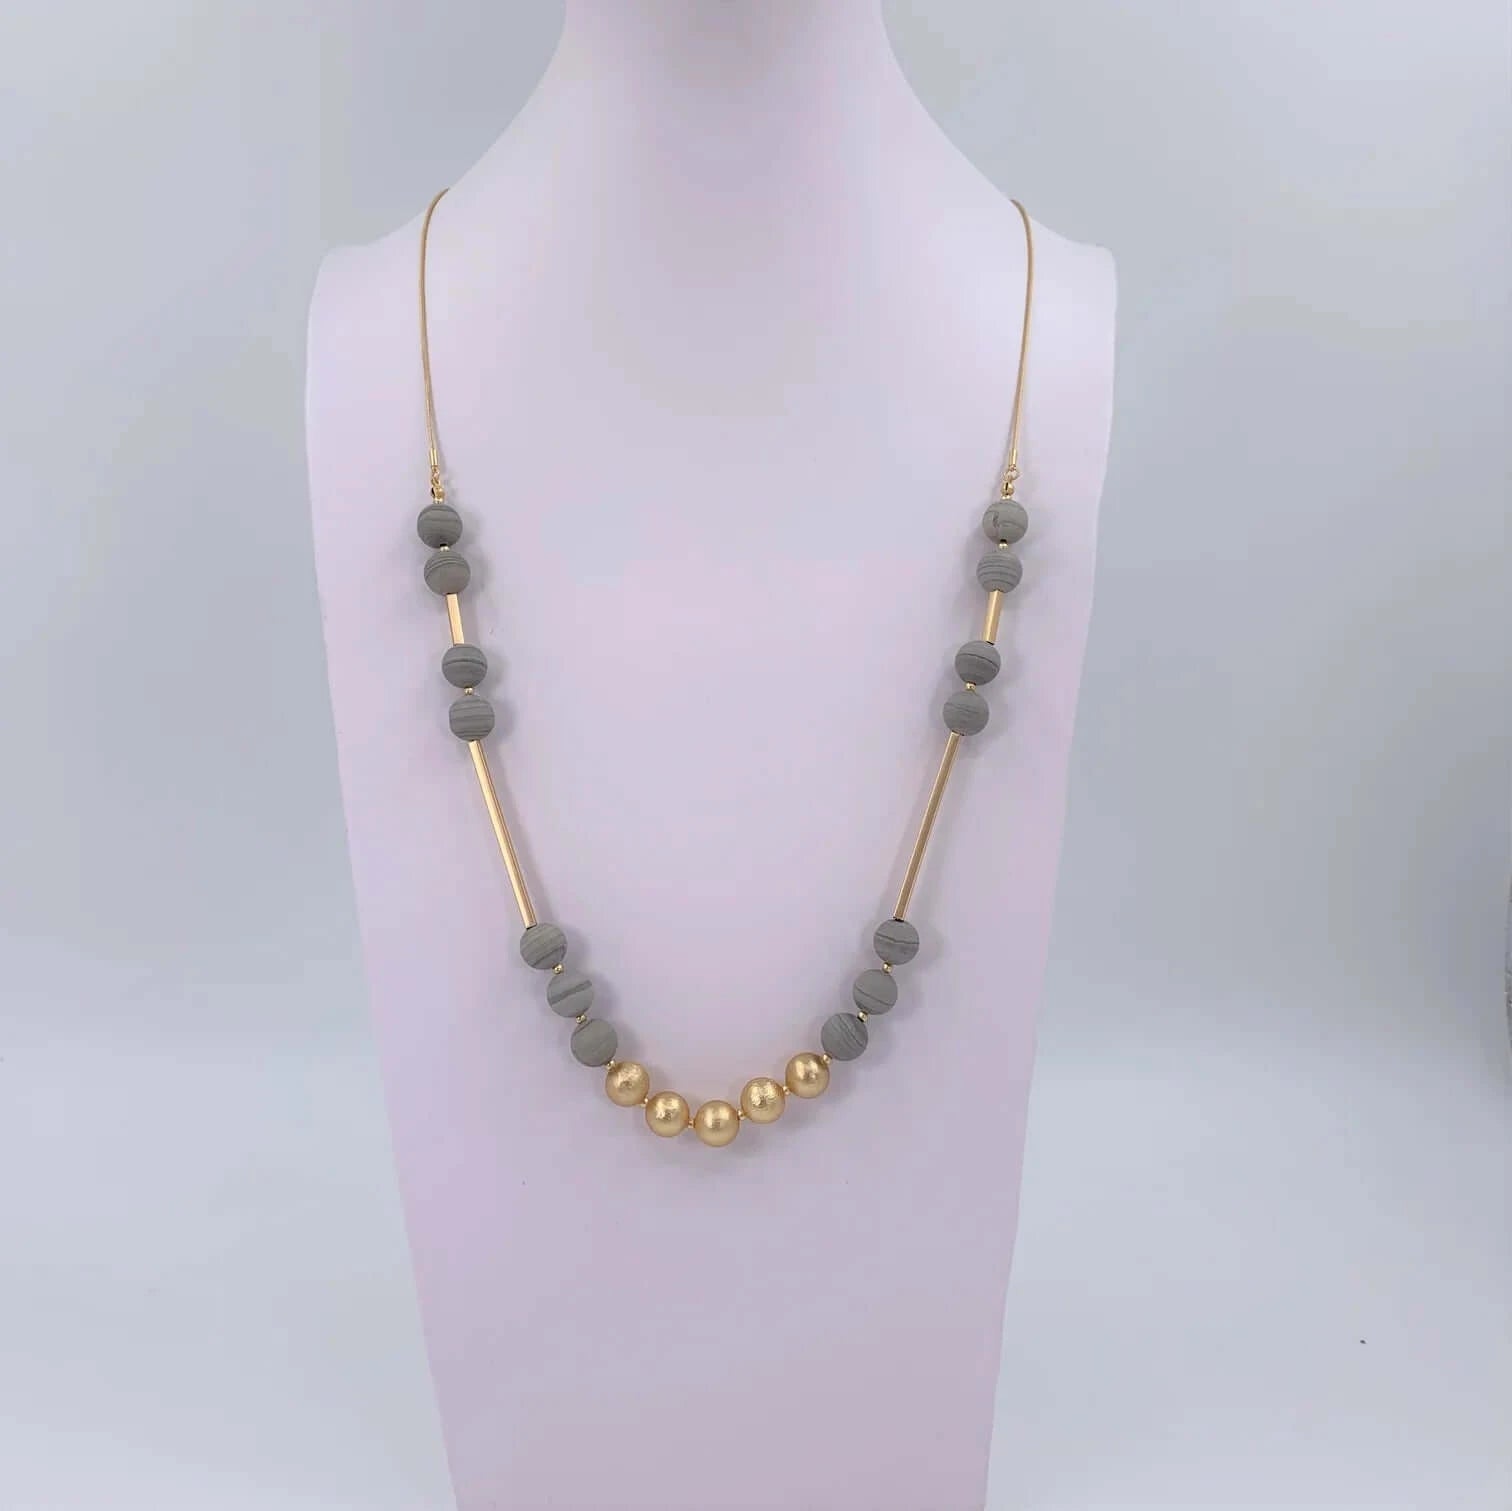 Long semi precious bead necklace with gold plated bead section